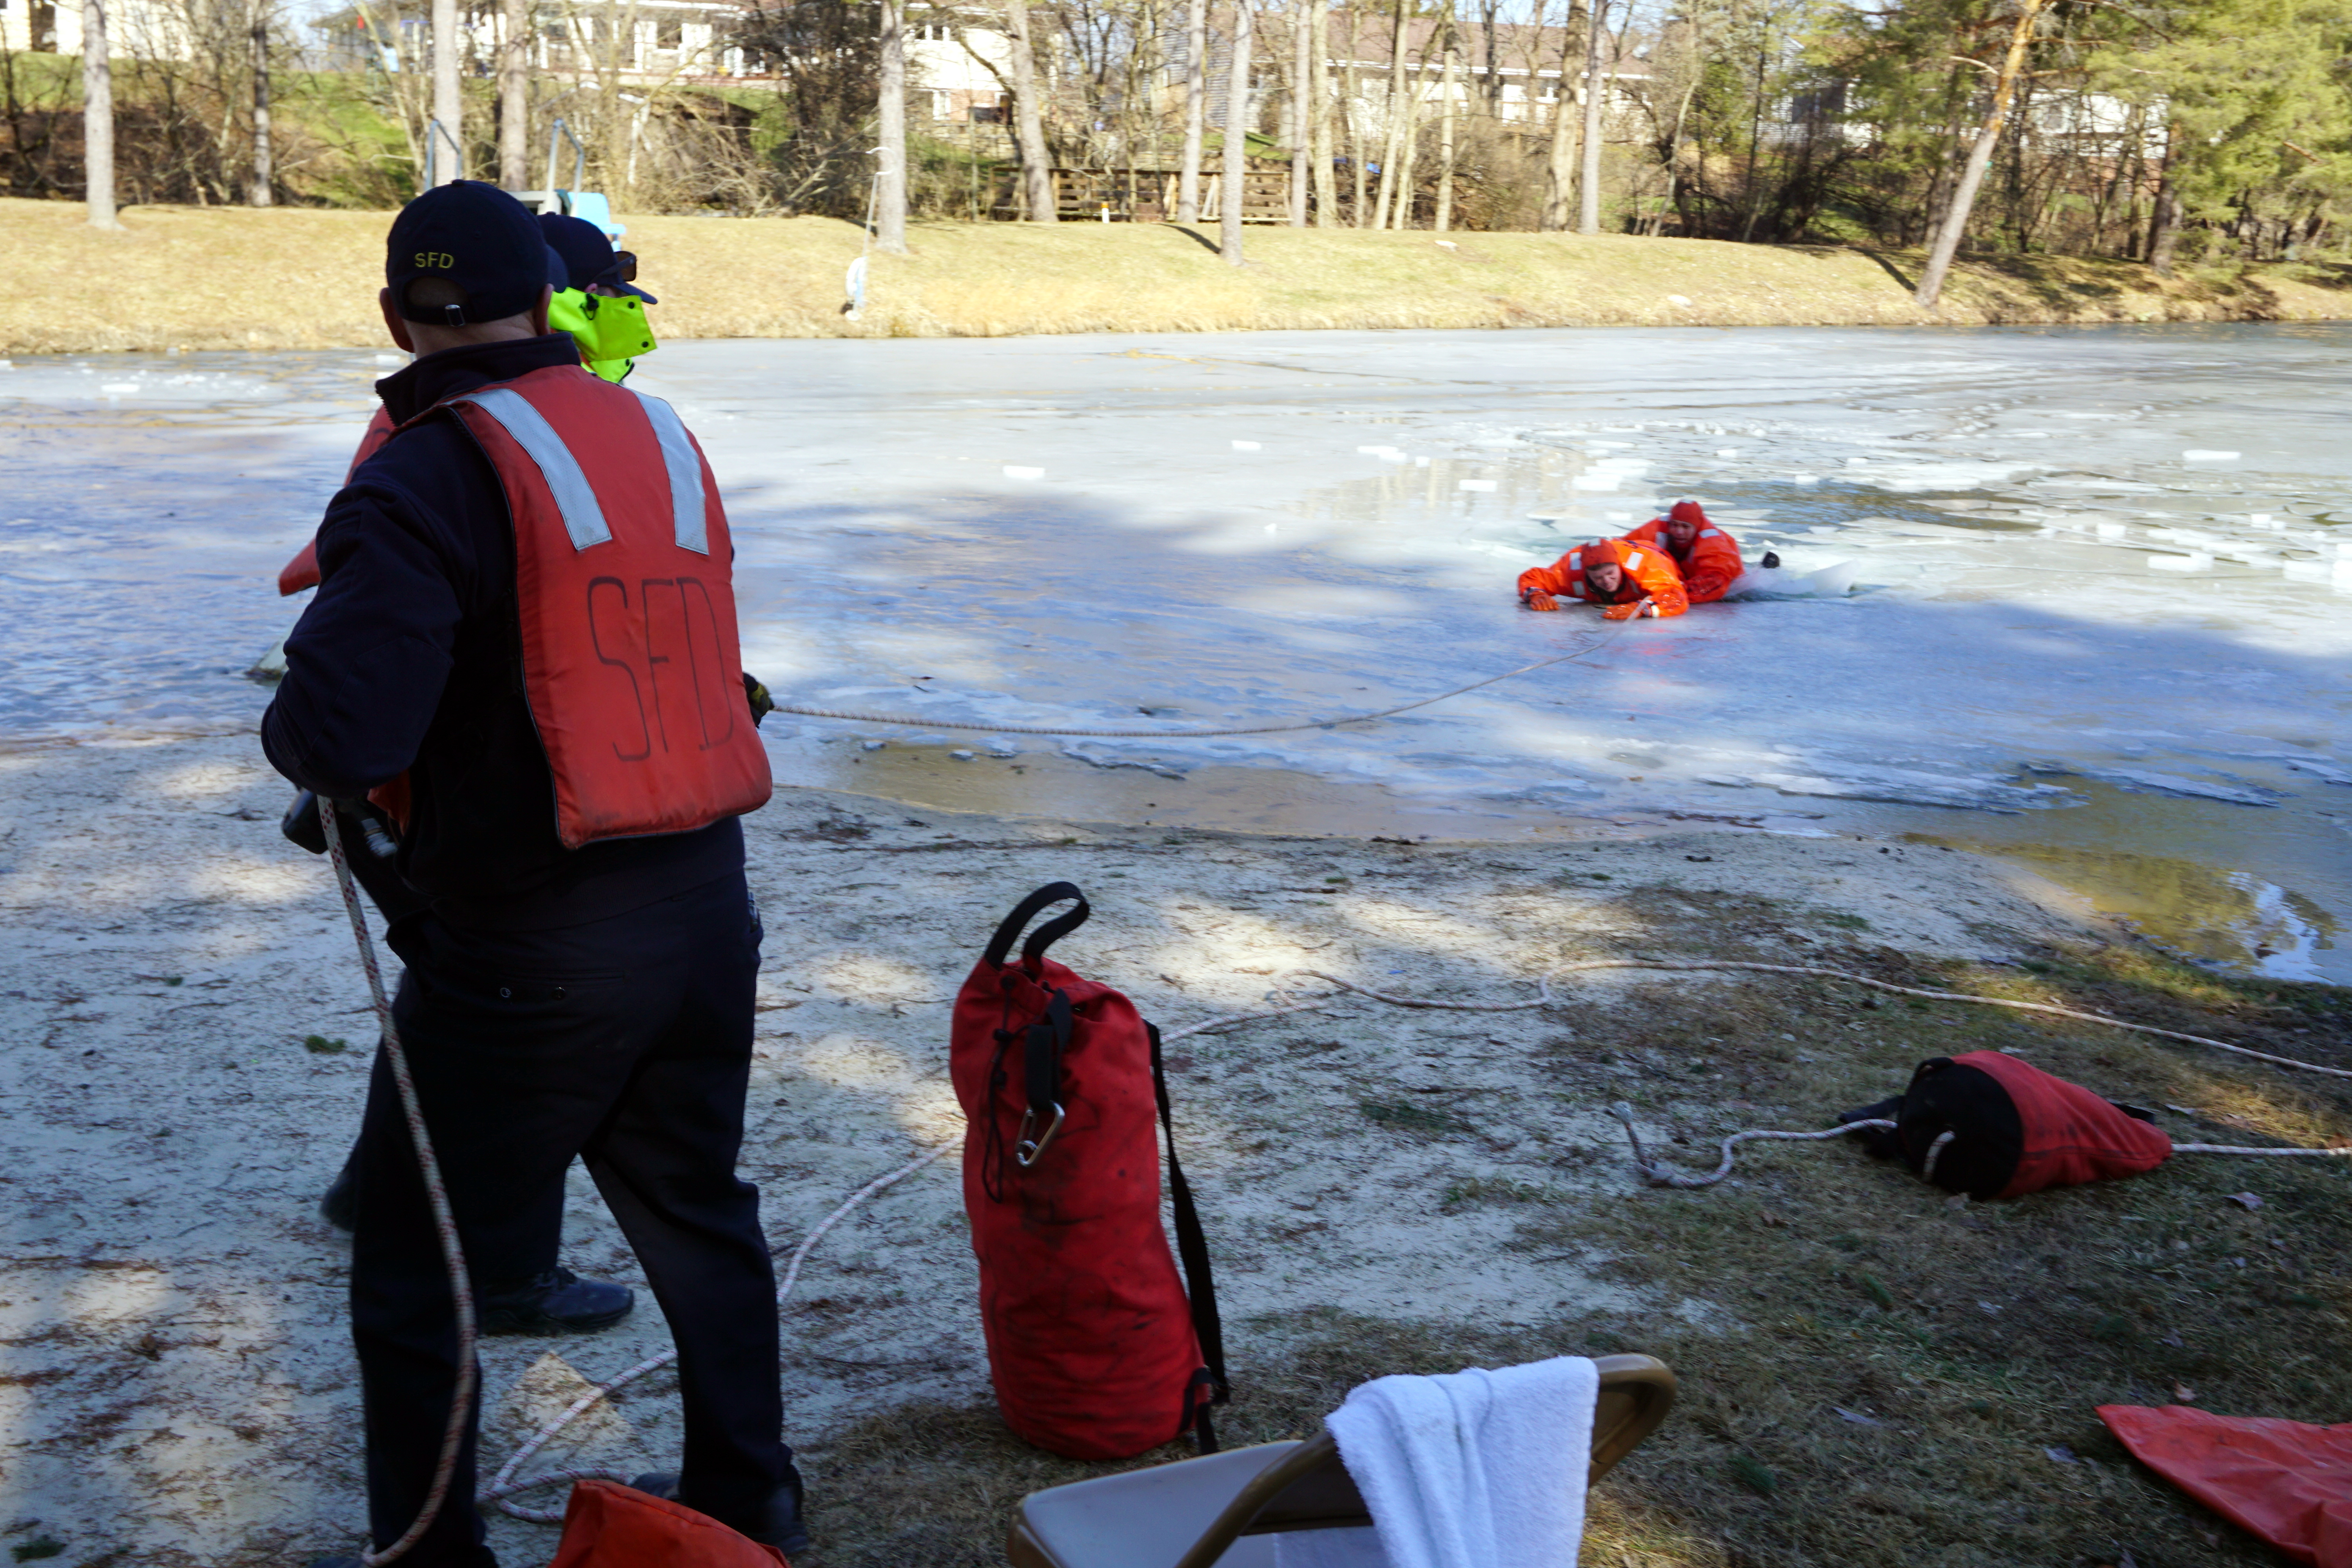 Firefighters Practice Ice Rescue